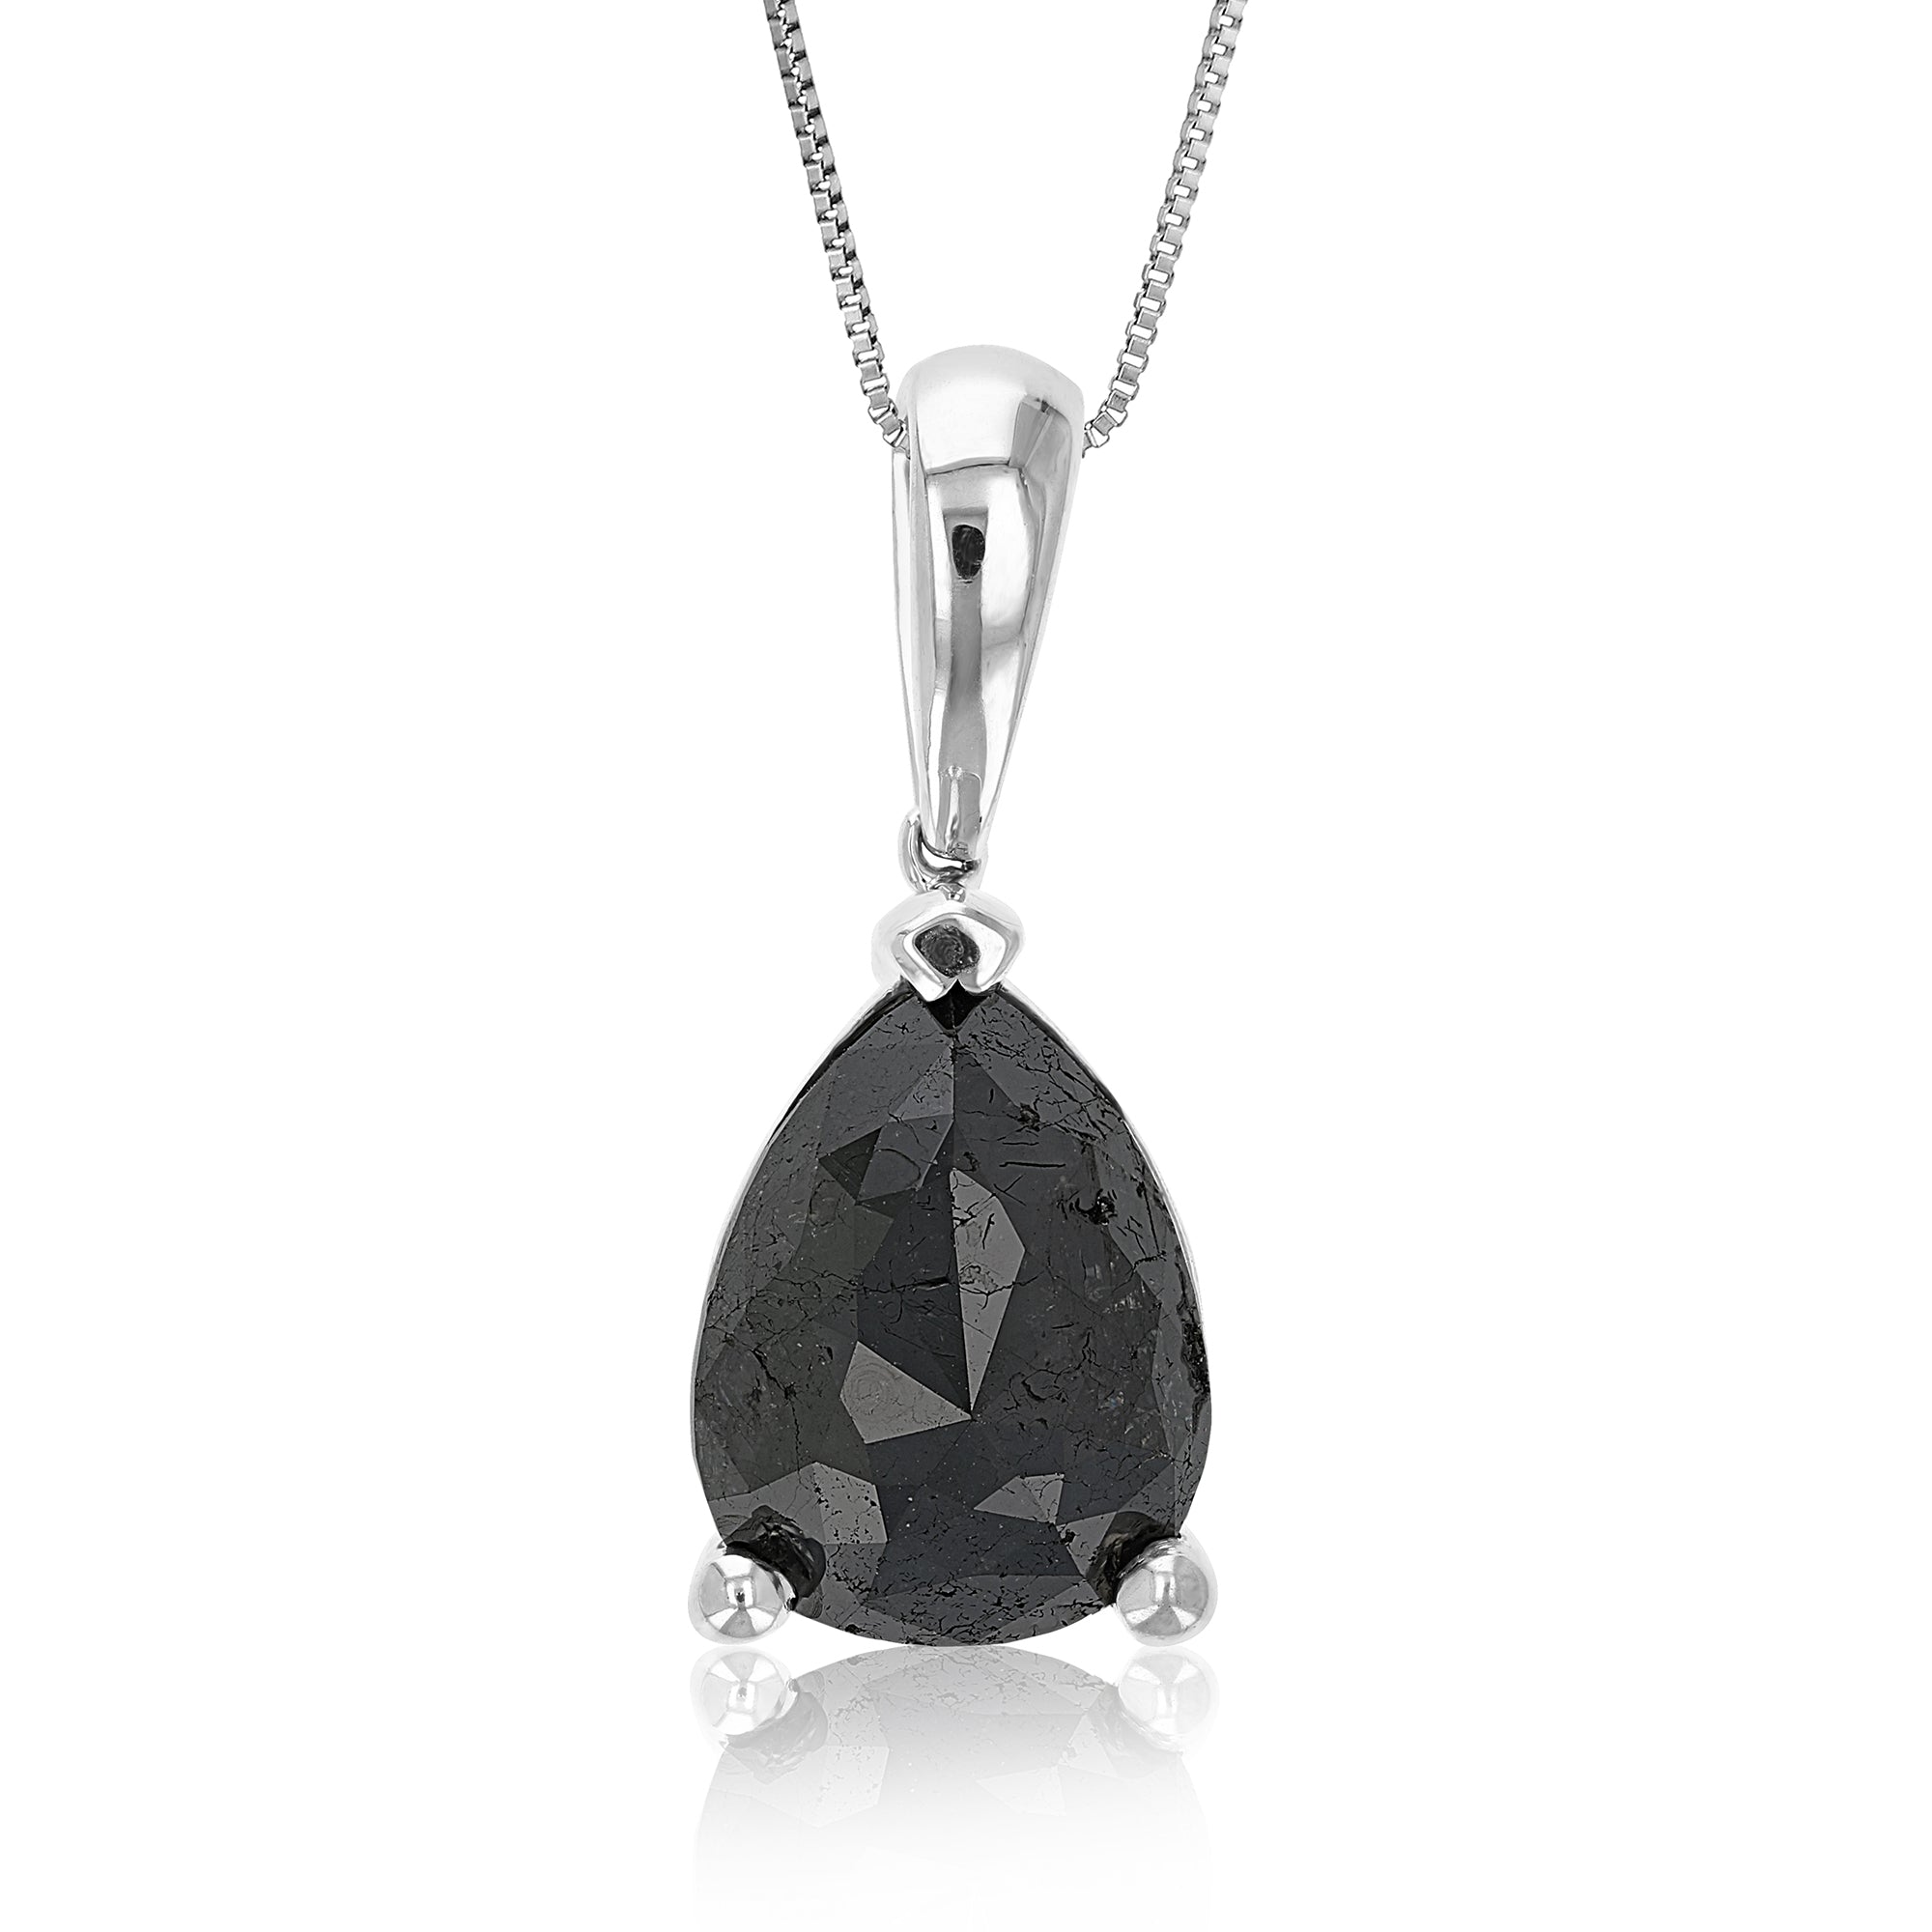 3.50 cttw Diamond Pendant, Black Diamond Pear Shape Pendant Necklace for Women in .925 Sterling Silver with 18 Inch Chain, Prong Setting